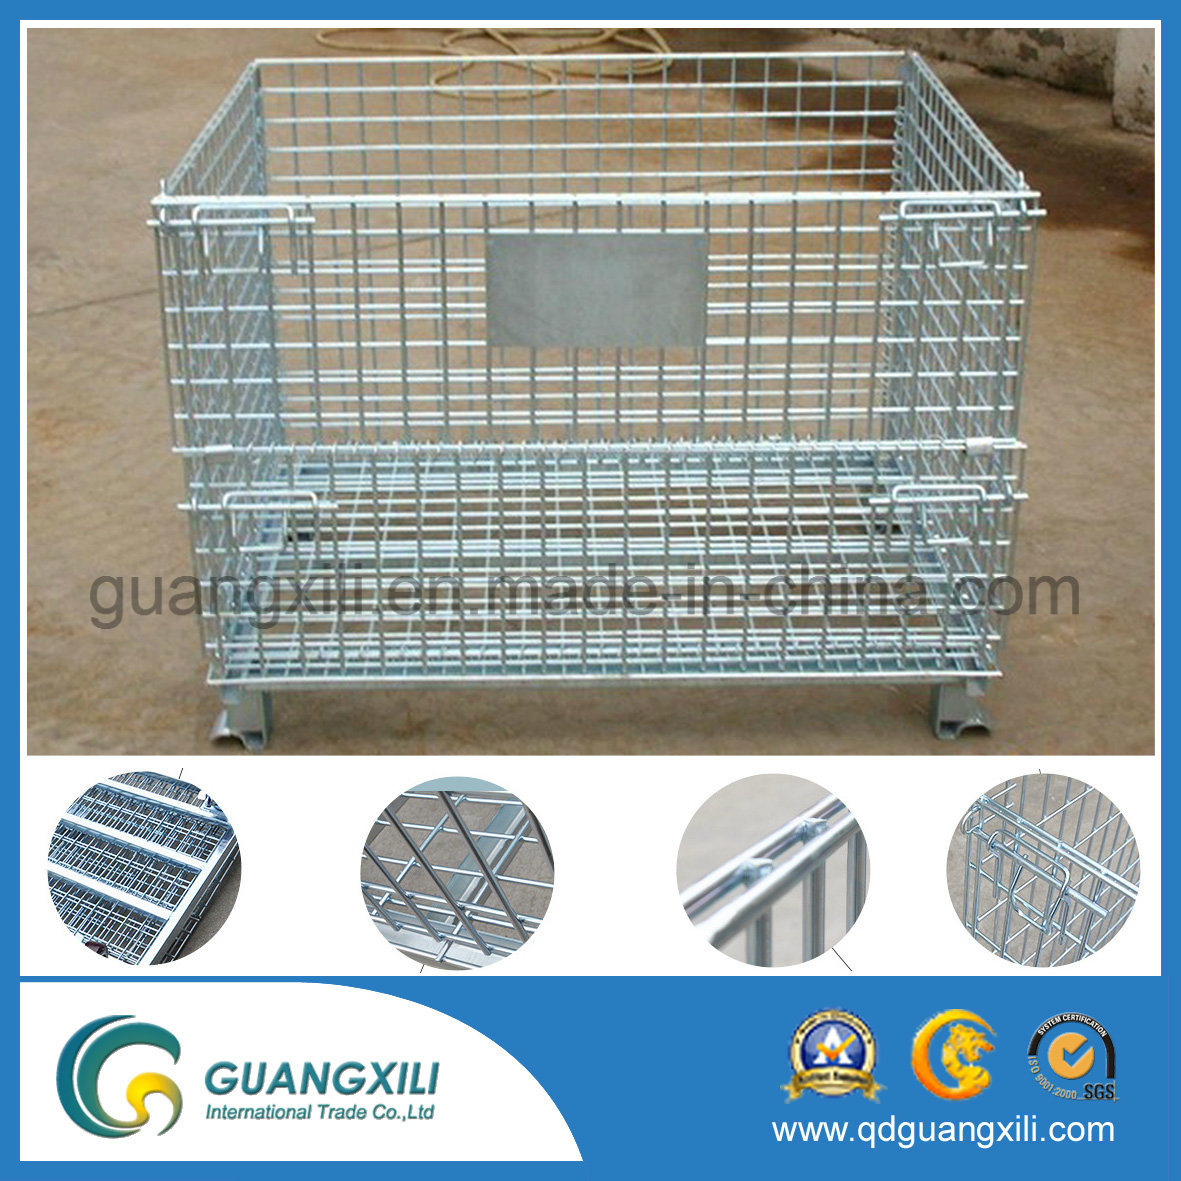 /proimages/2f0j00lZTtrpERRyuo/storage-heavy-weight-shelving-with-wire-mesh-pallet-cage.jpg